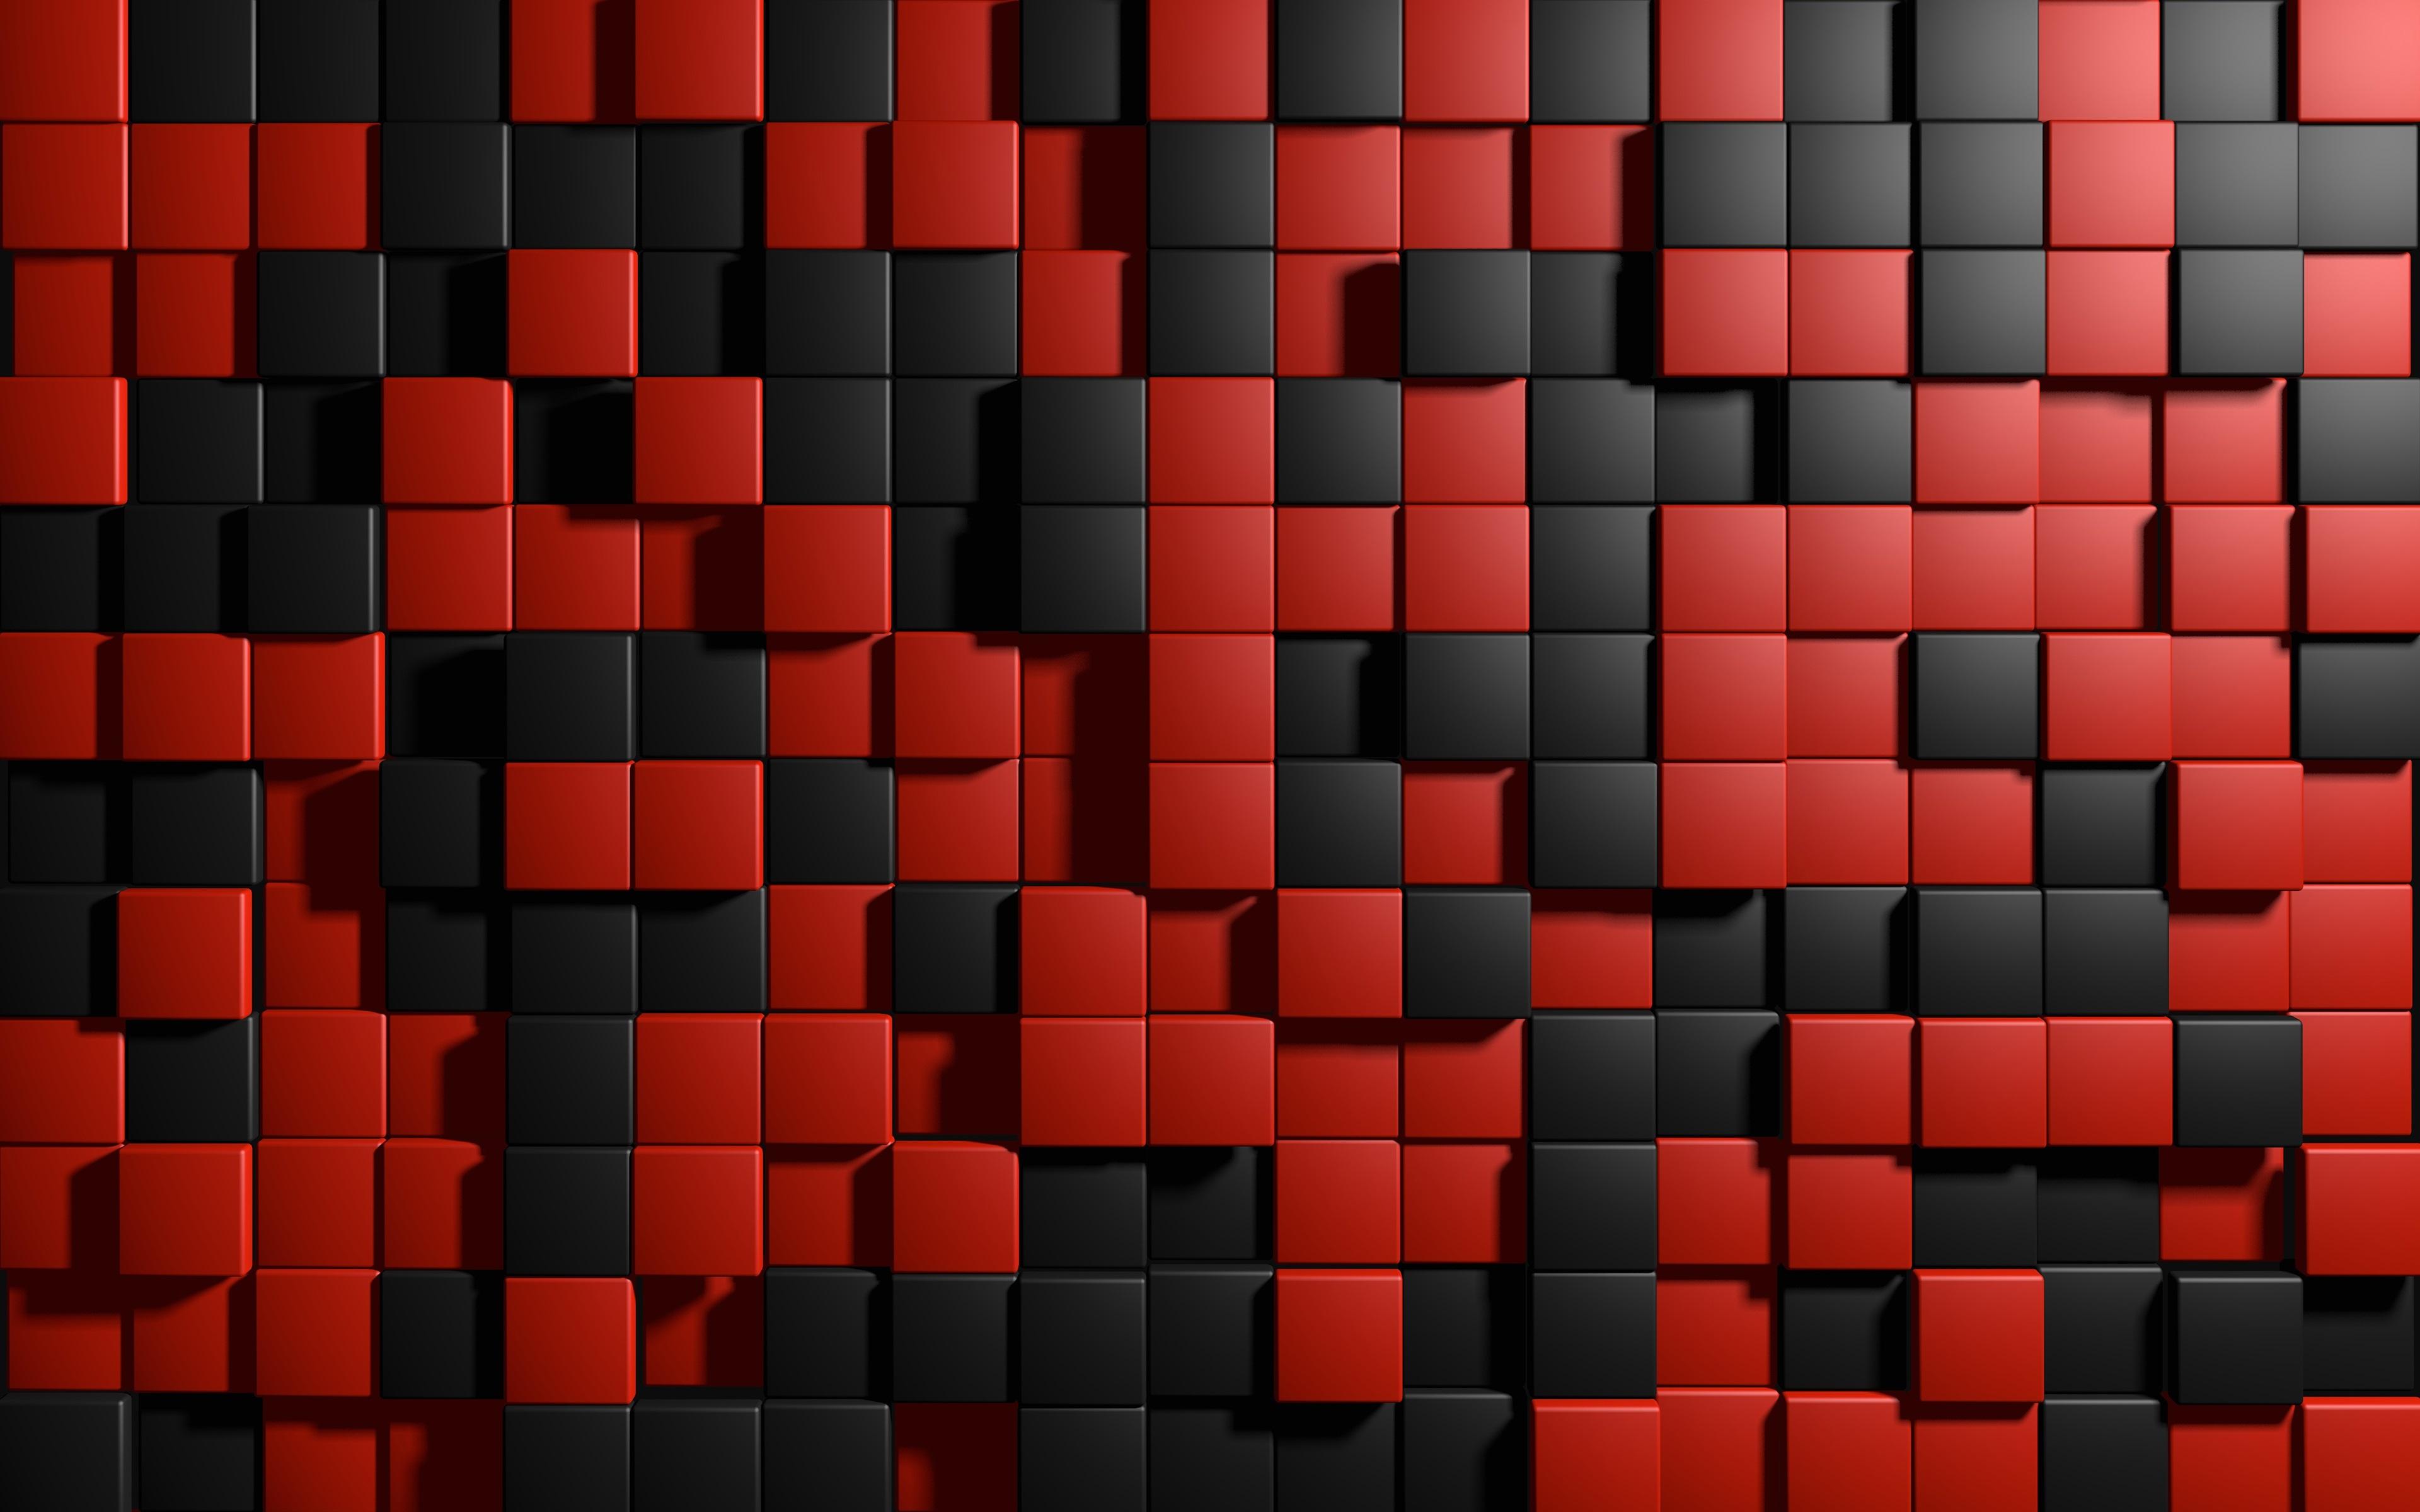 Download wallpaper cubes texture, 4k, red and black cubes, geometry